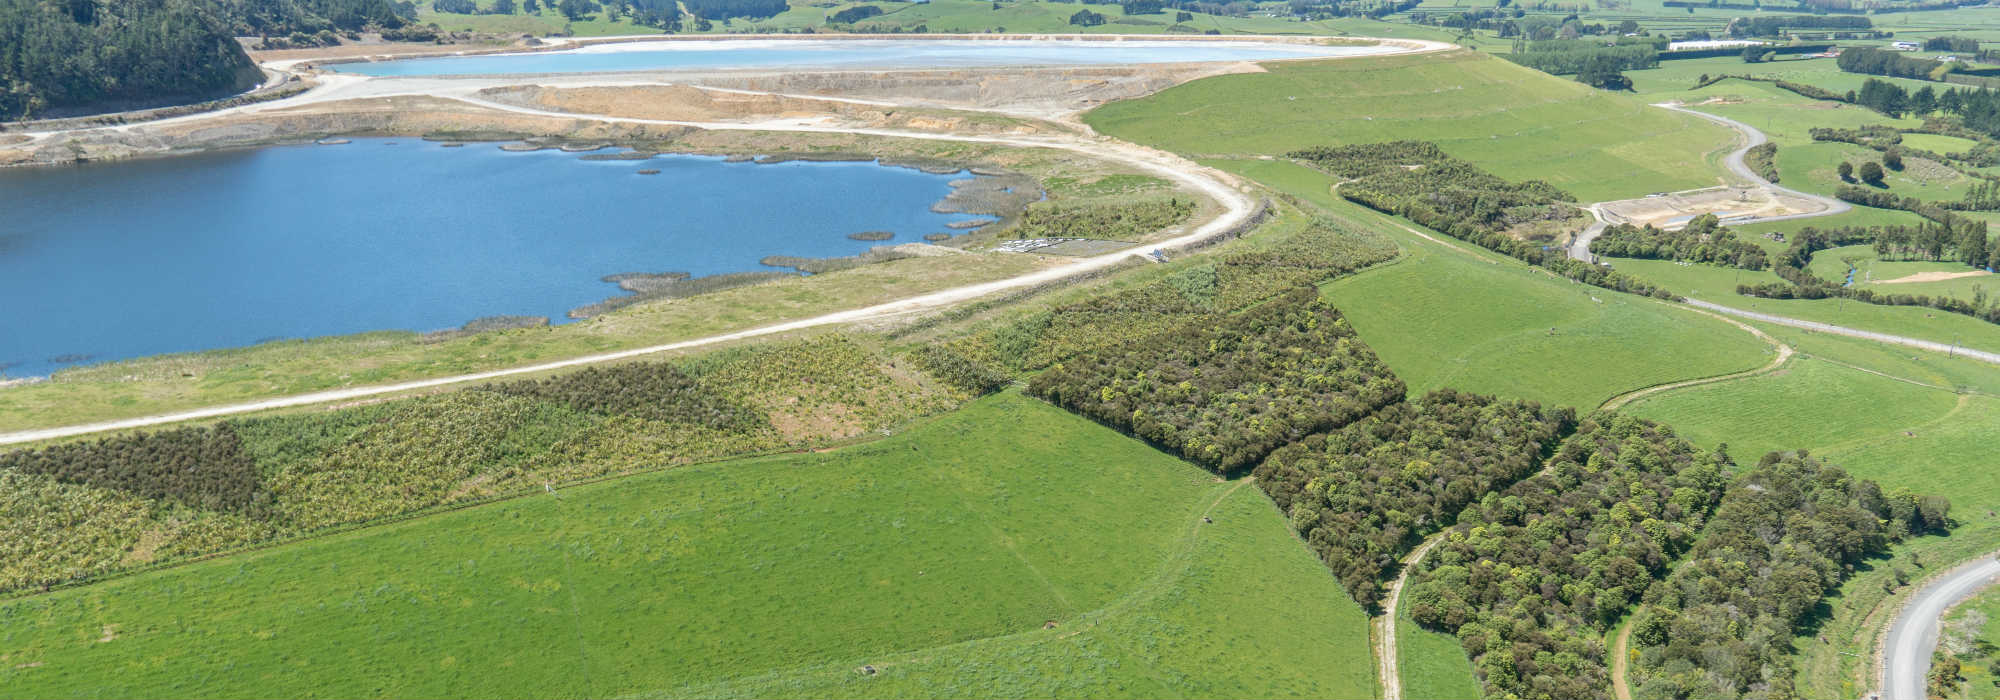 Find out about Oceana Gold’s approach to tailings management